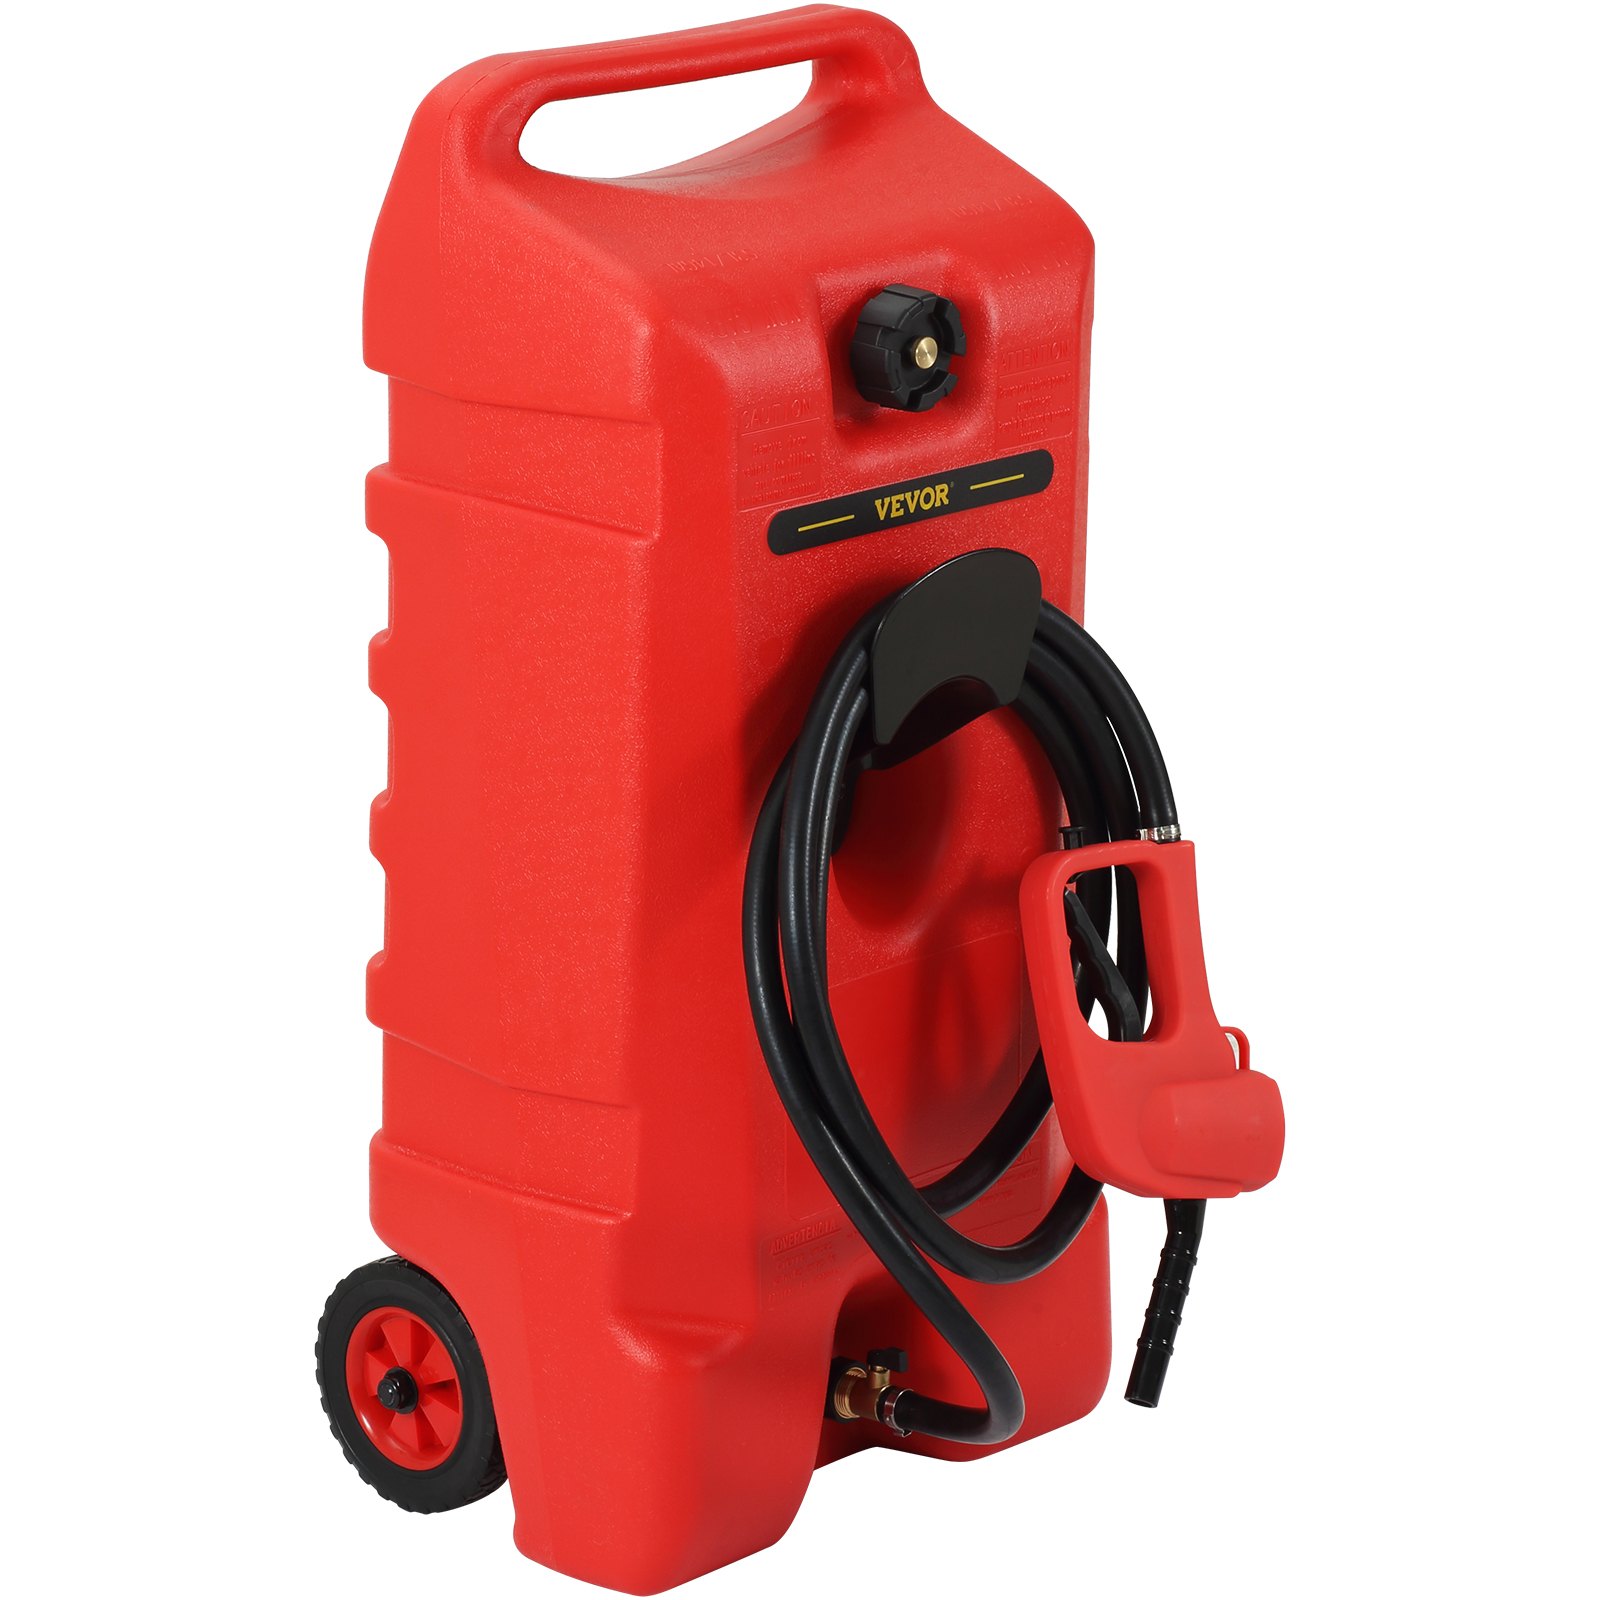 VEVOR Fuel Caddy Portable Fuel Storage Tank 14 Gallon On-Wheels with ...